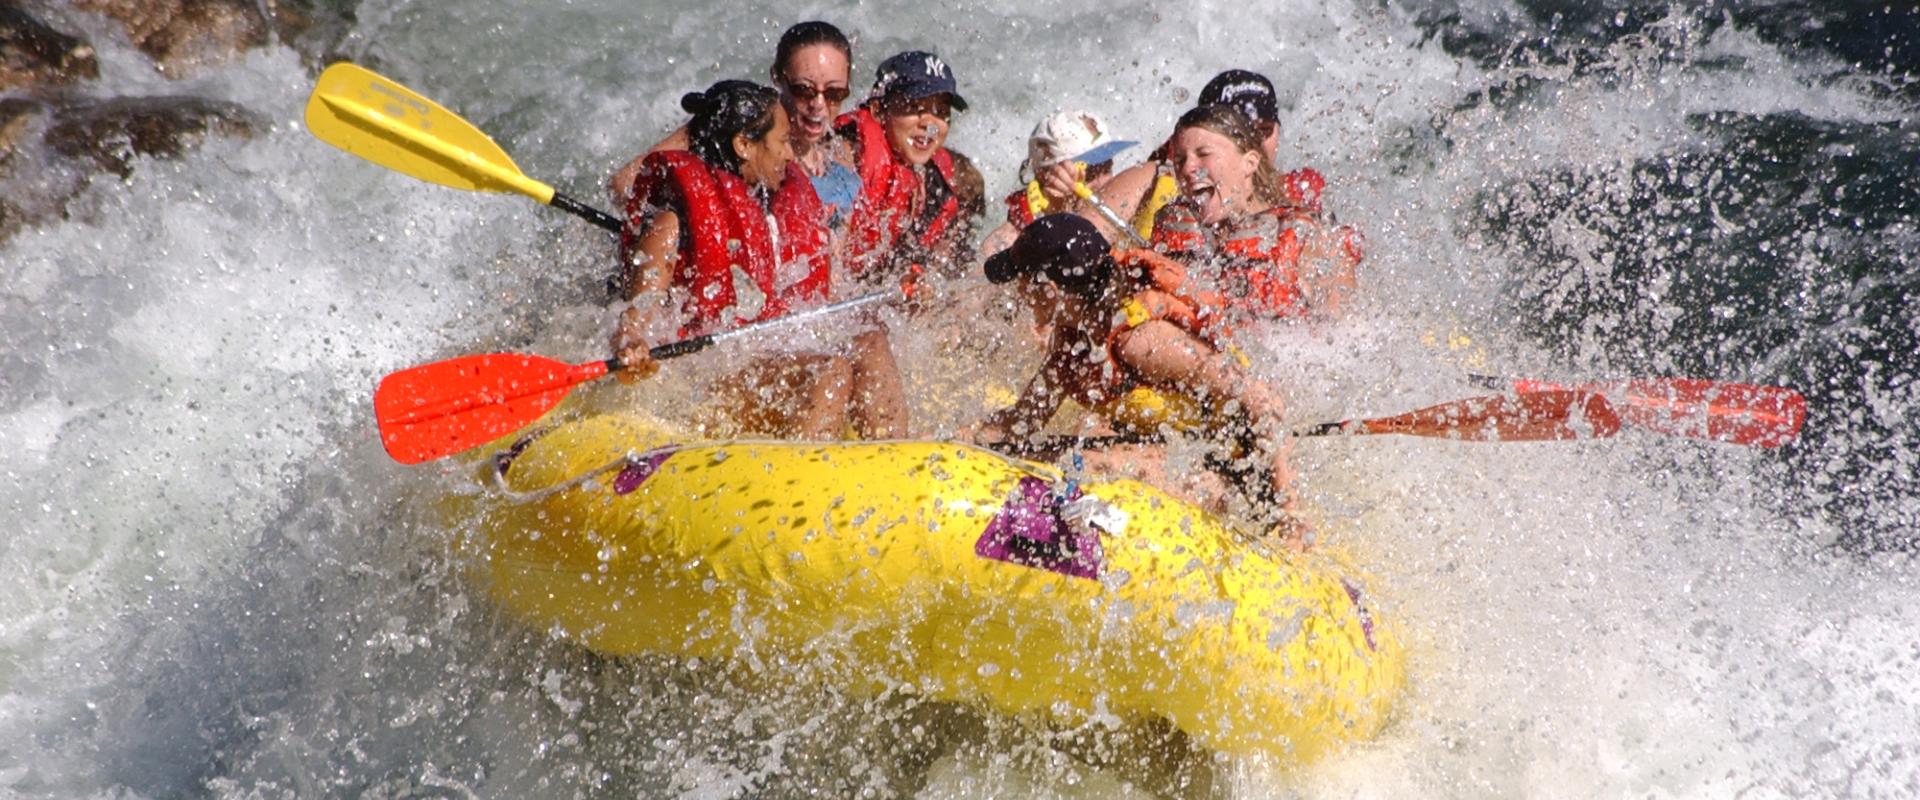 Rafting experience on the river of Tanagro 